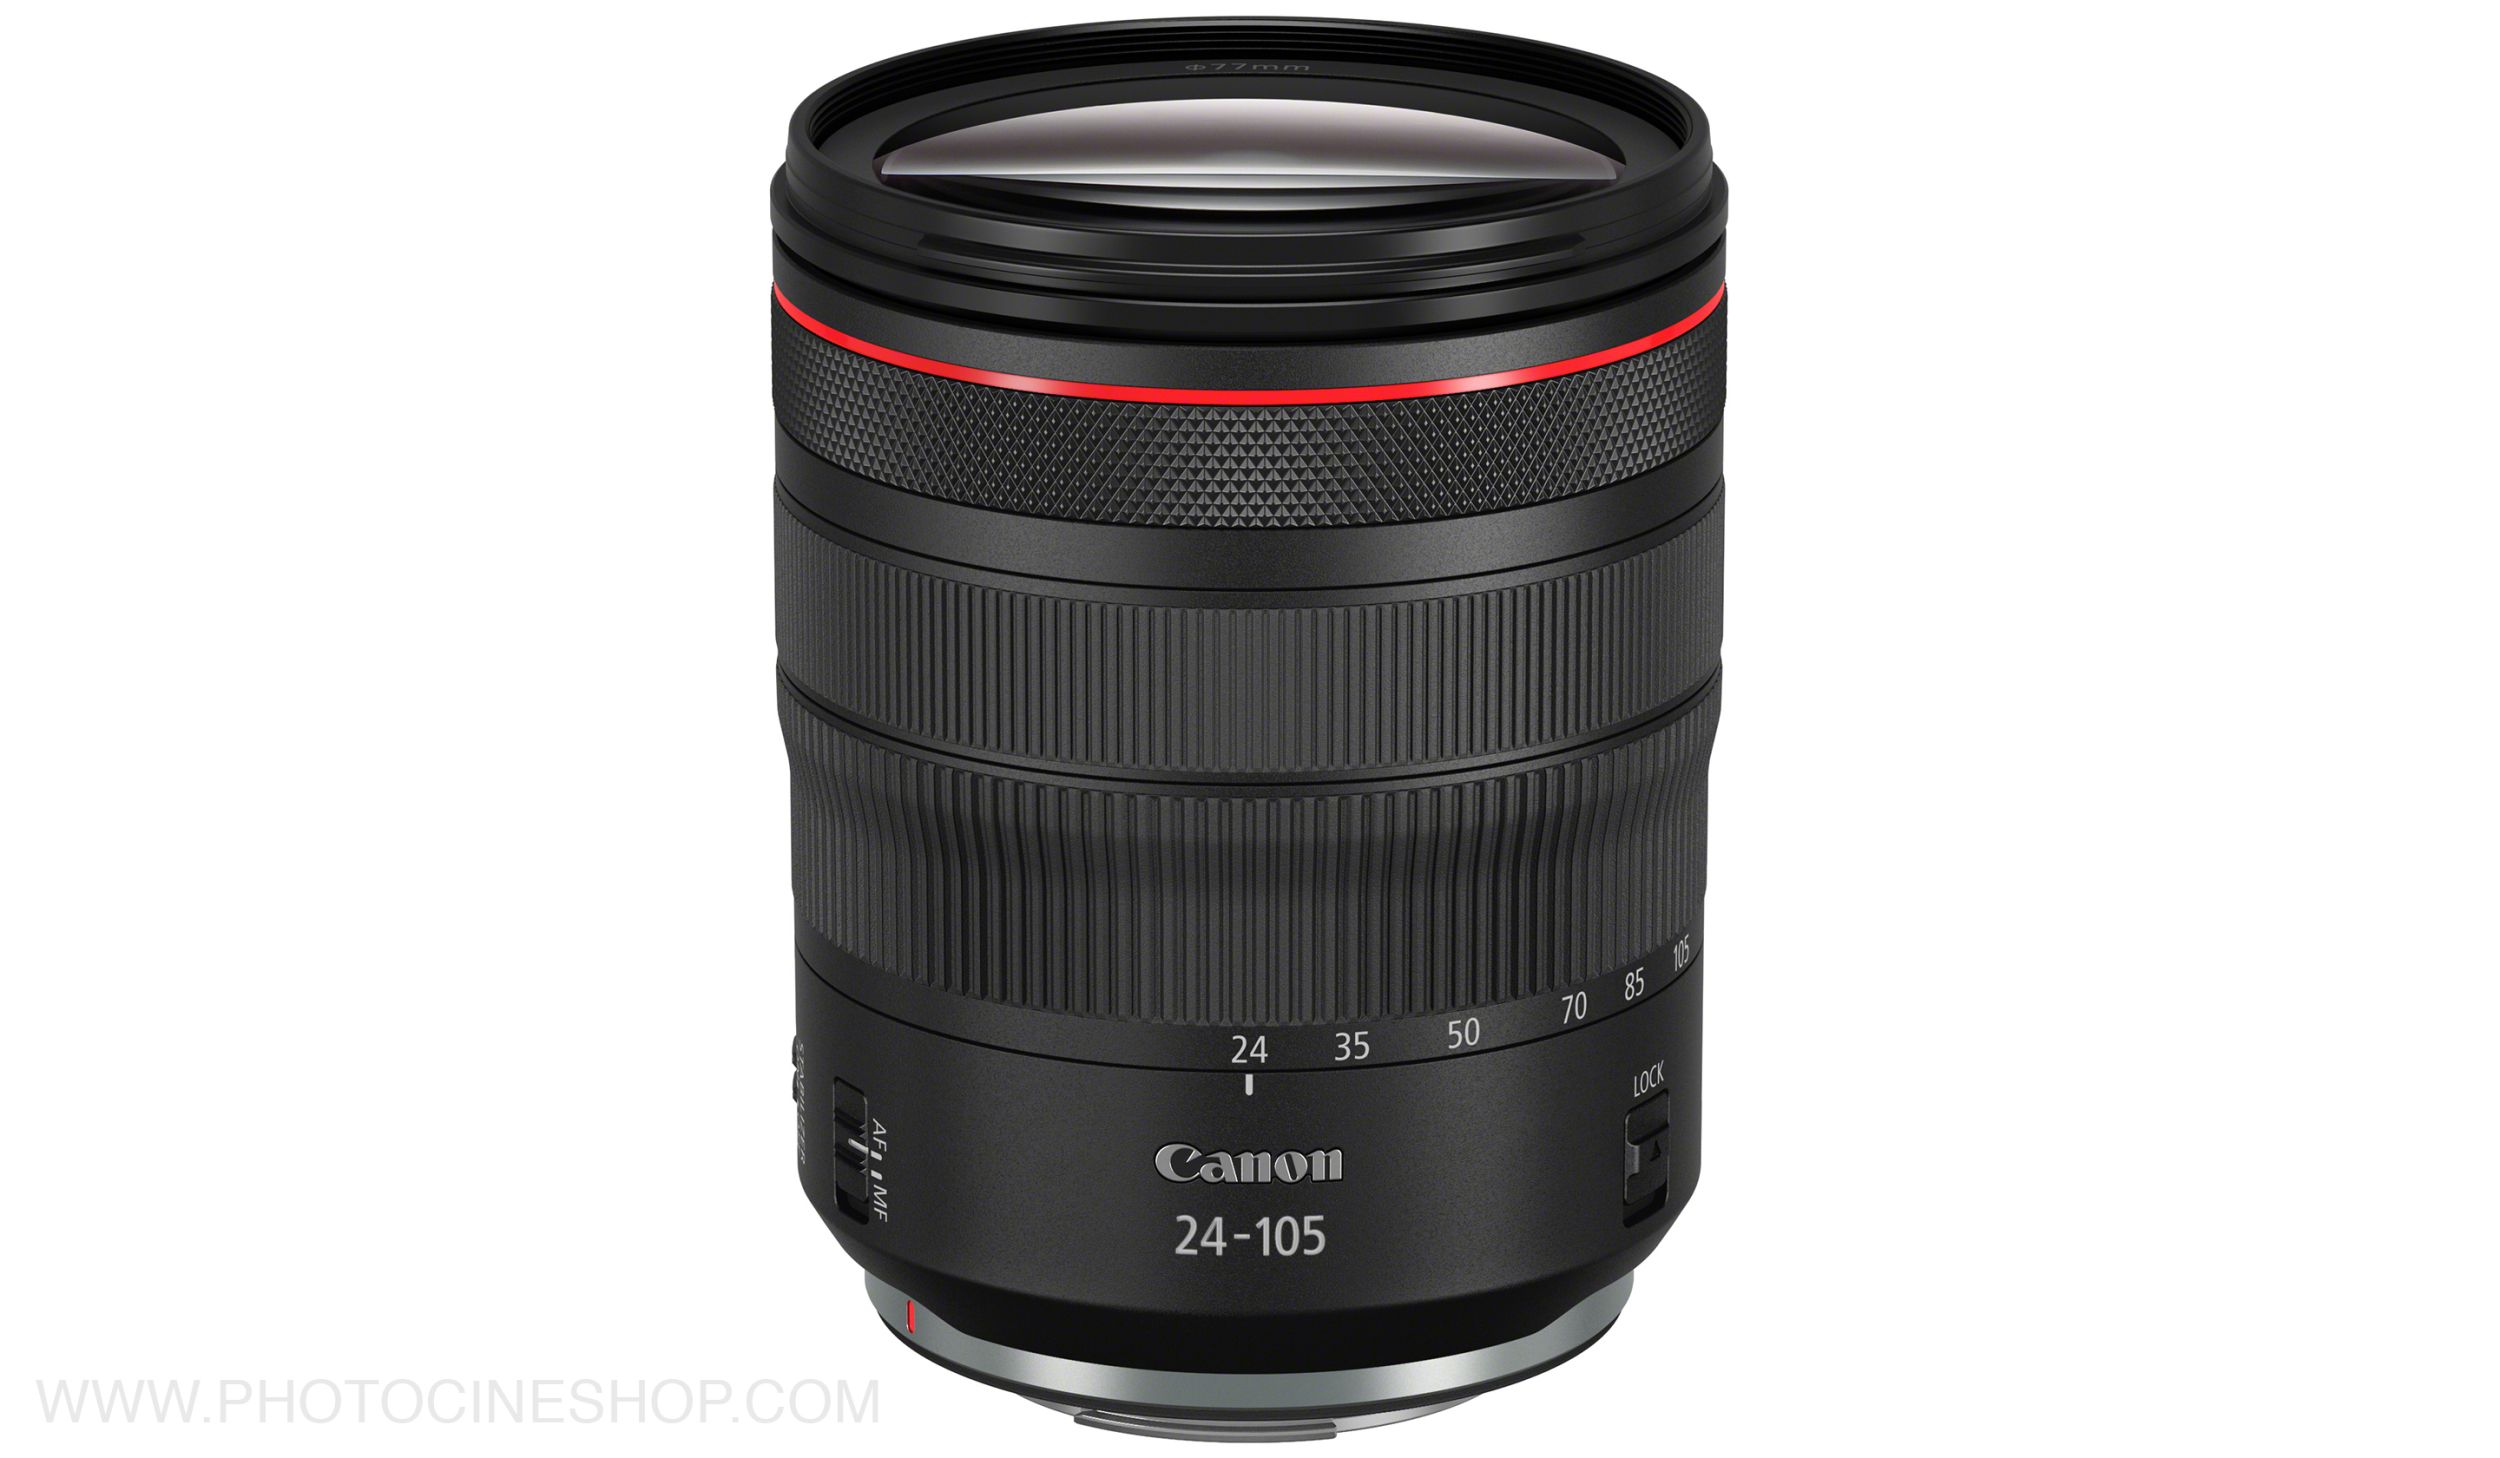 CANON - EOS RF 24-105mm f/4 L IS USM